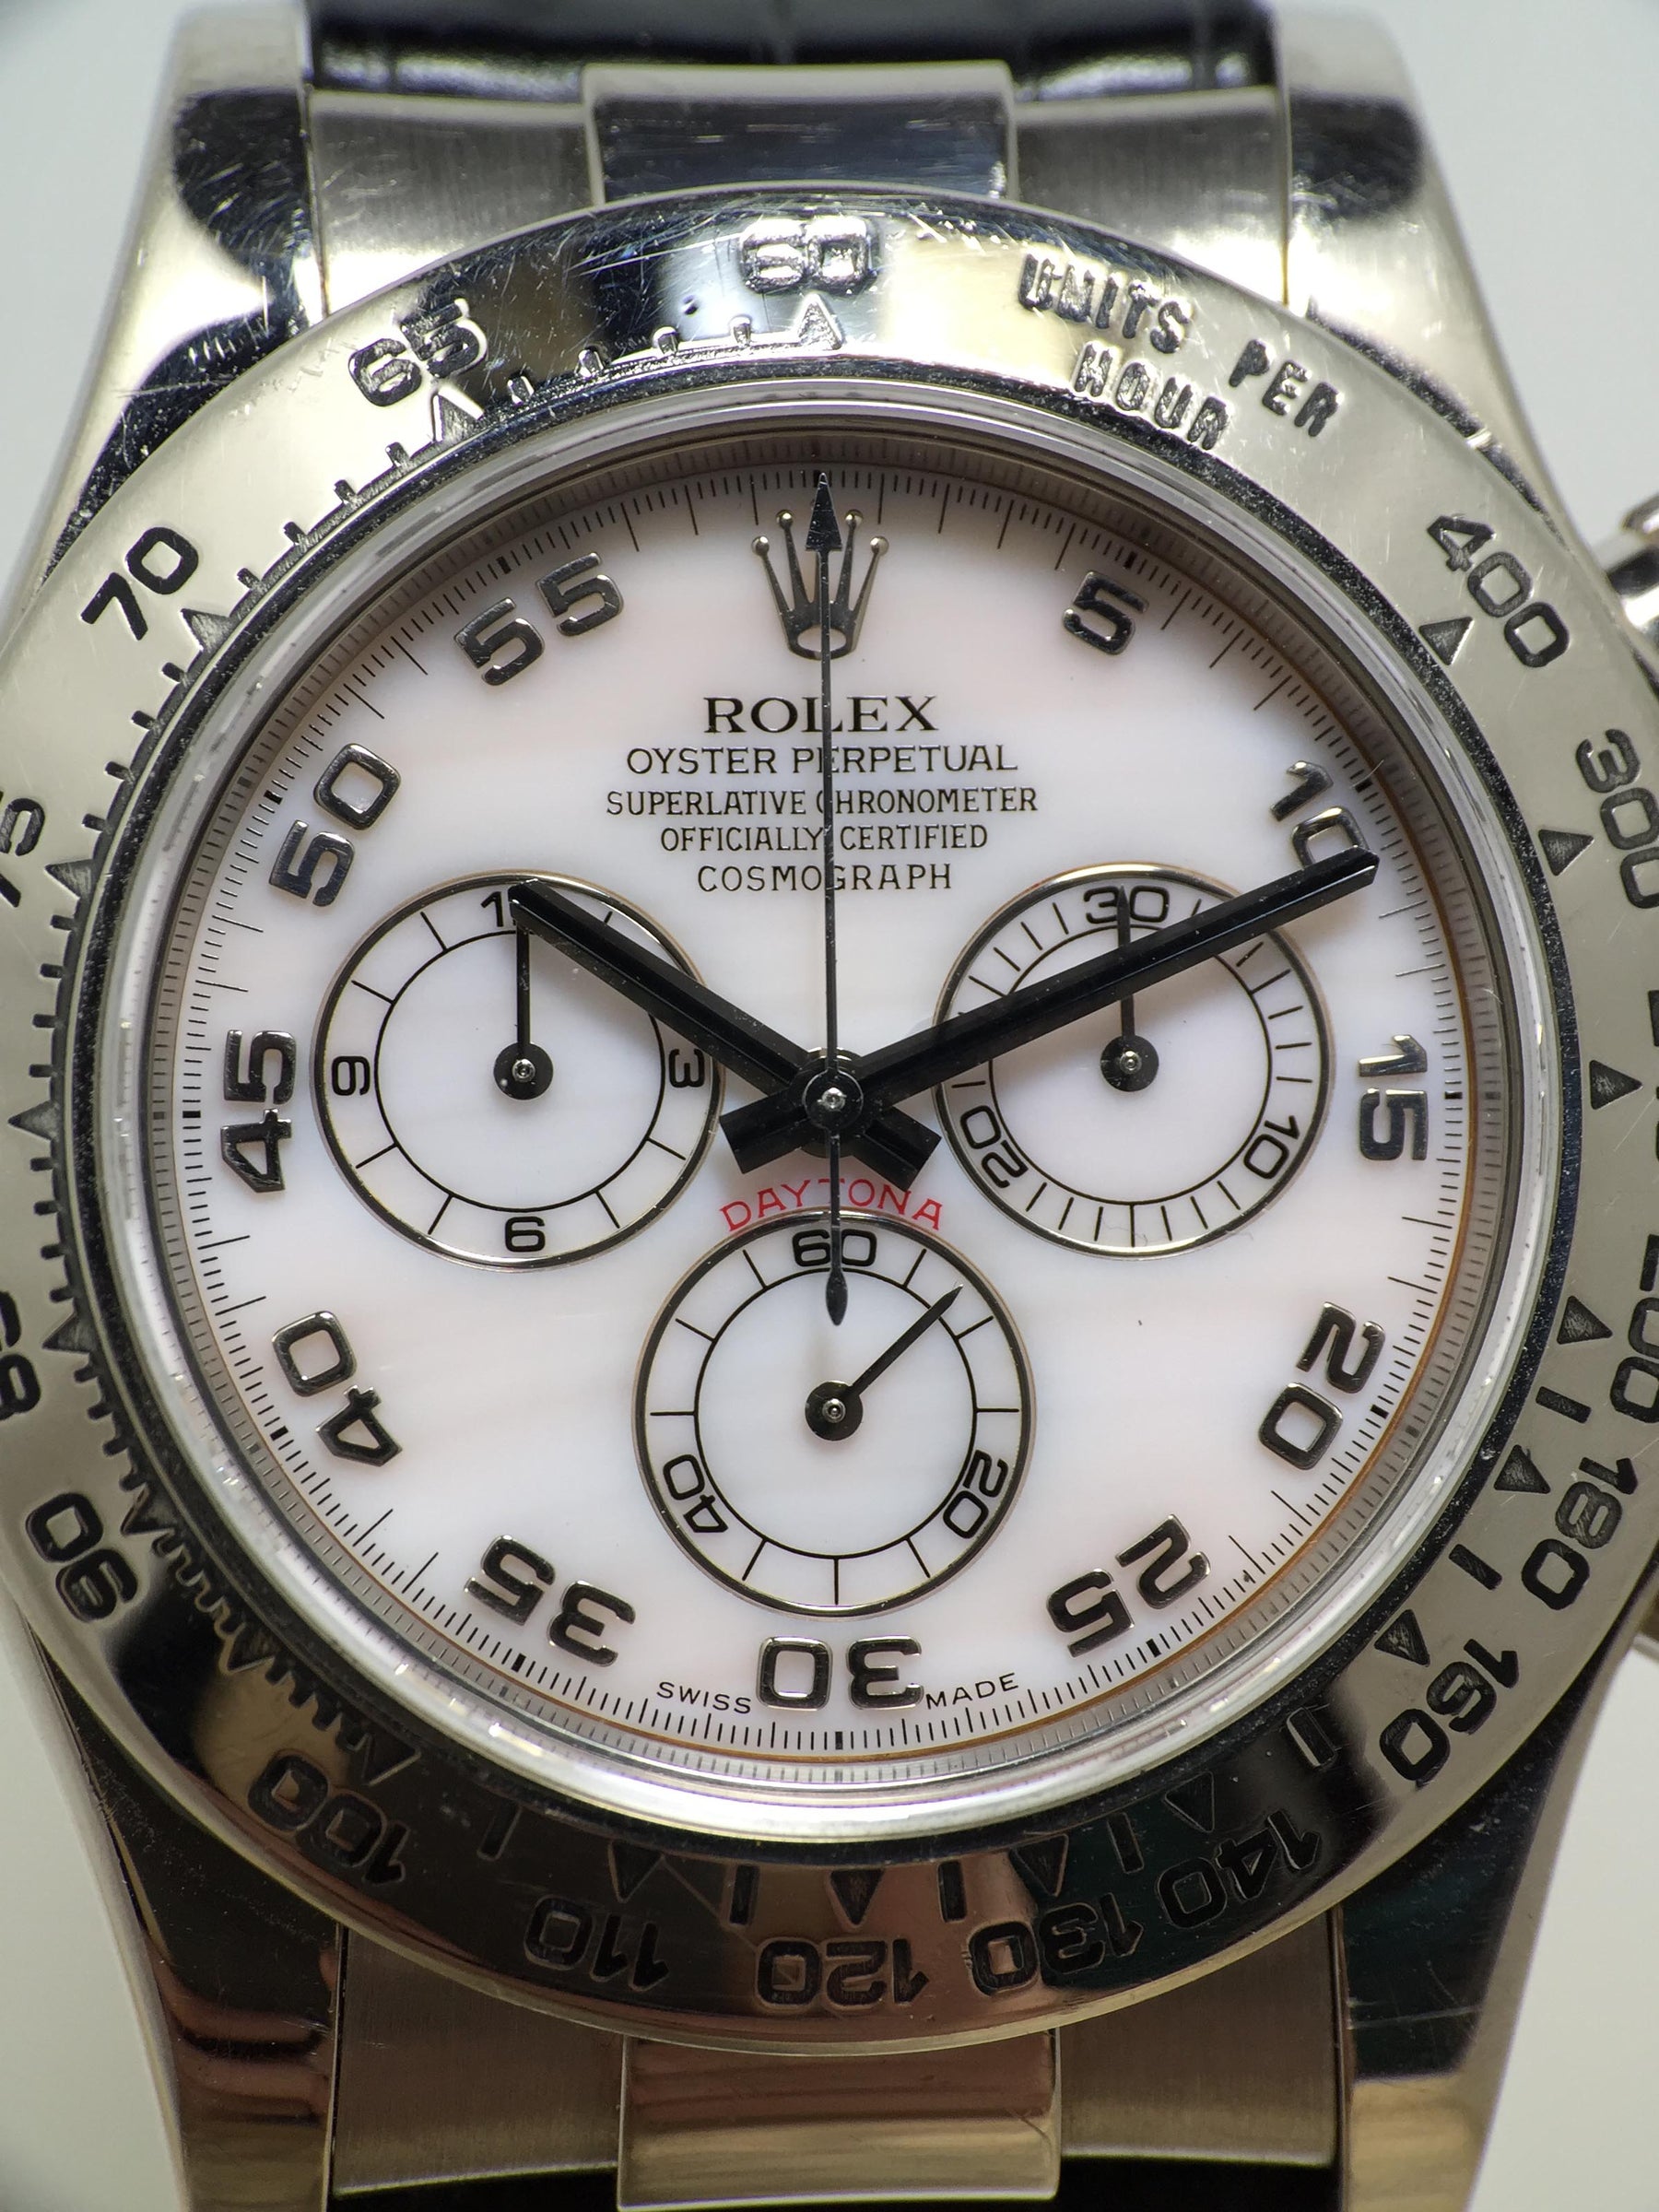 2001 Rolex Daytona Pink MOP Dial Ref. 116519 (with Certificate)